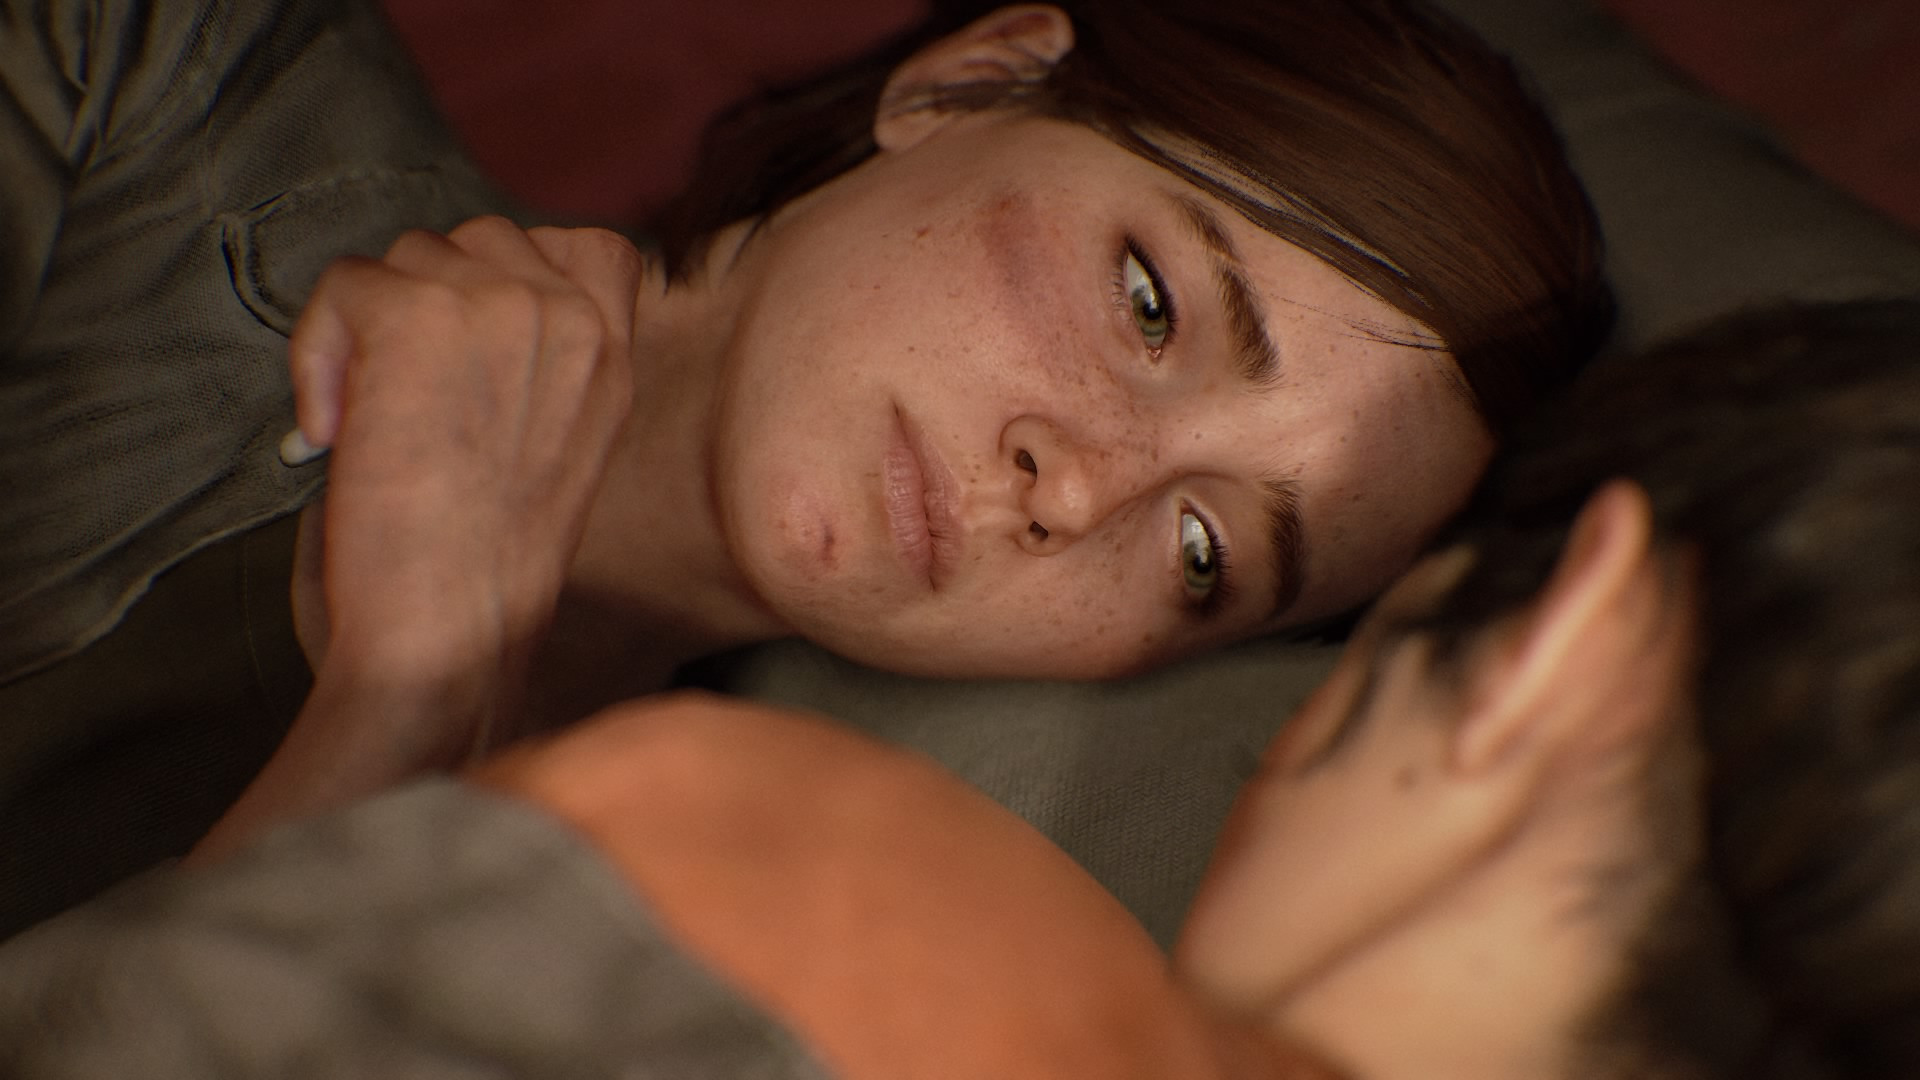 Ellie lies down close to someone whose face we can see, looking intimately at them, her face slightly bruised and sad